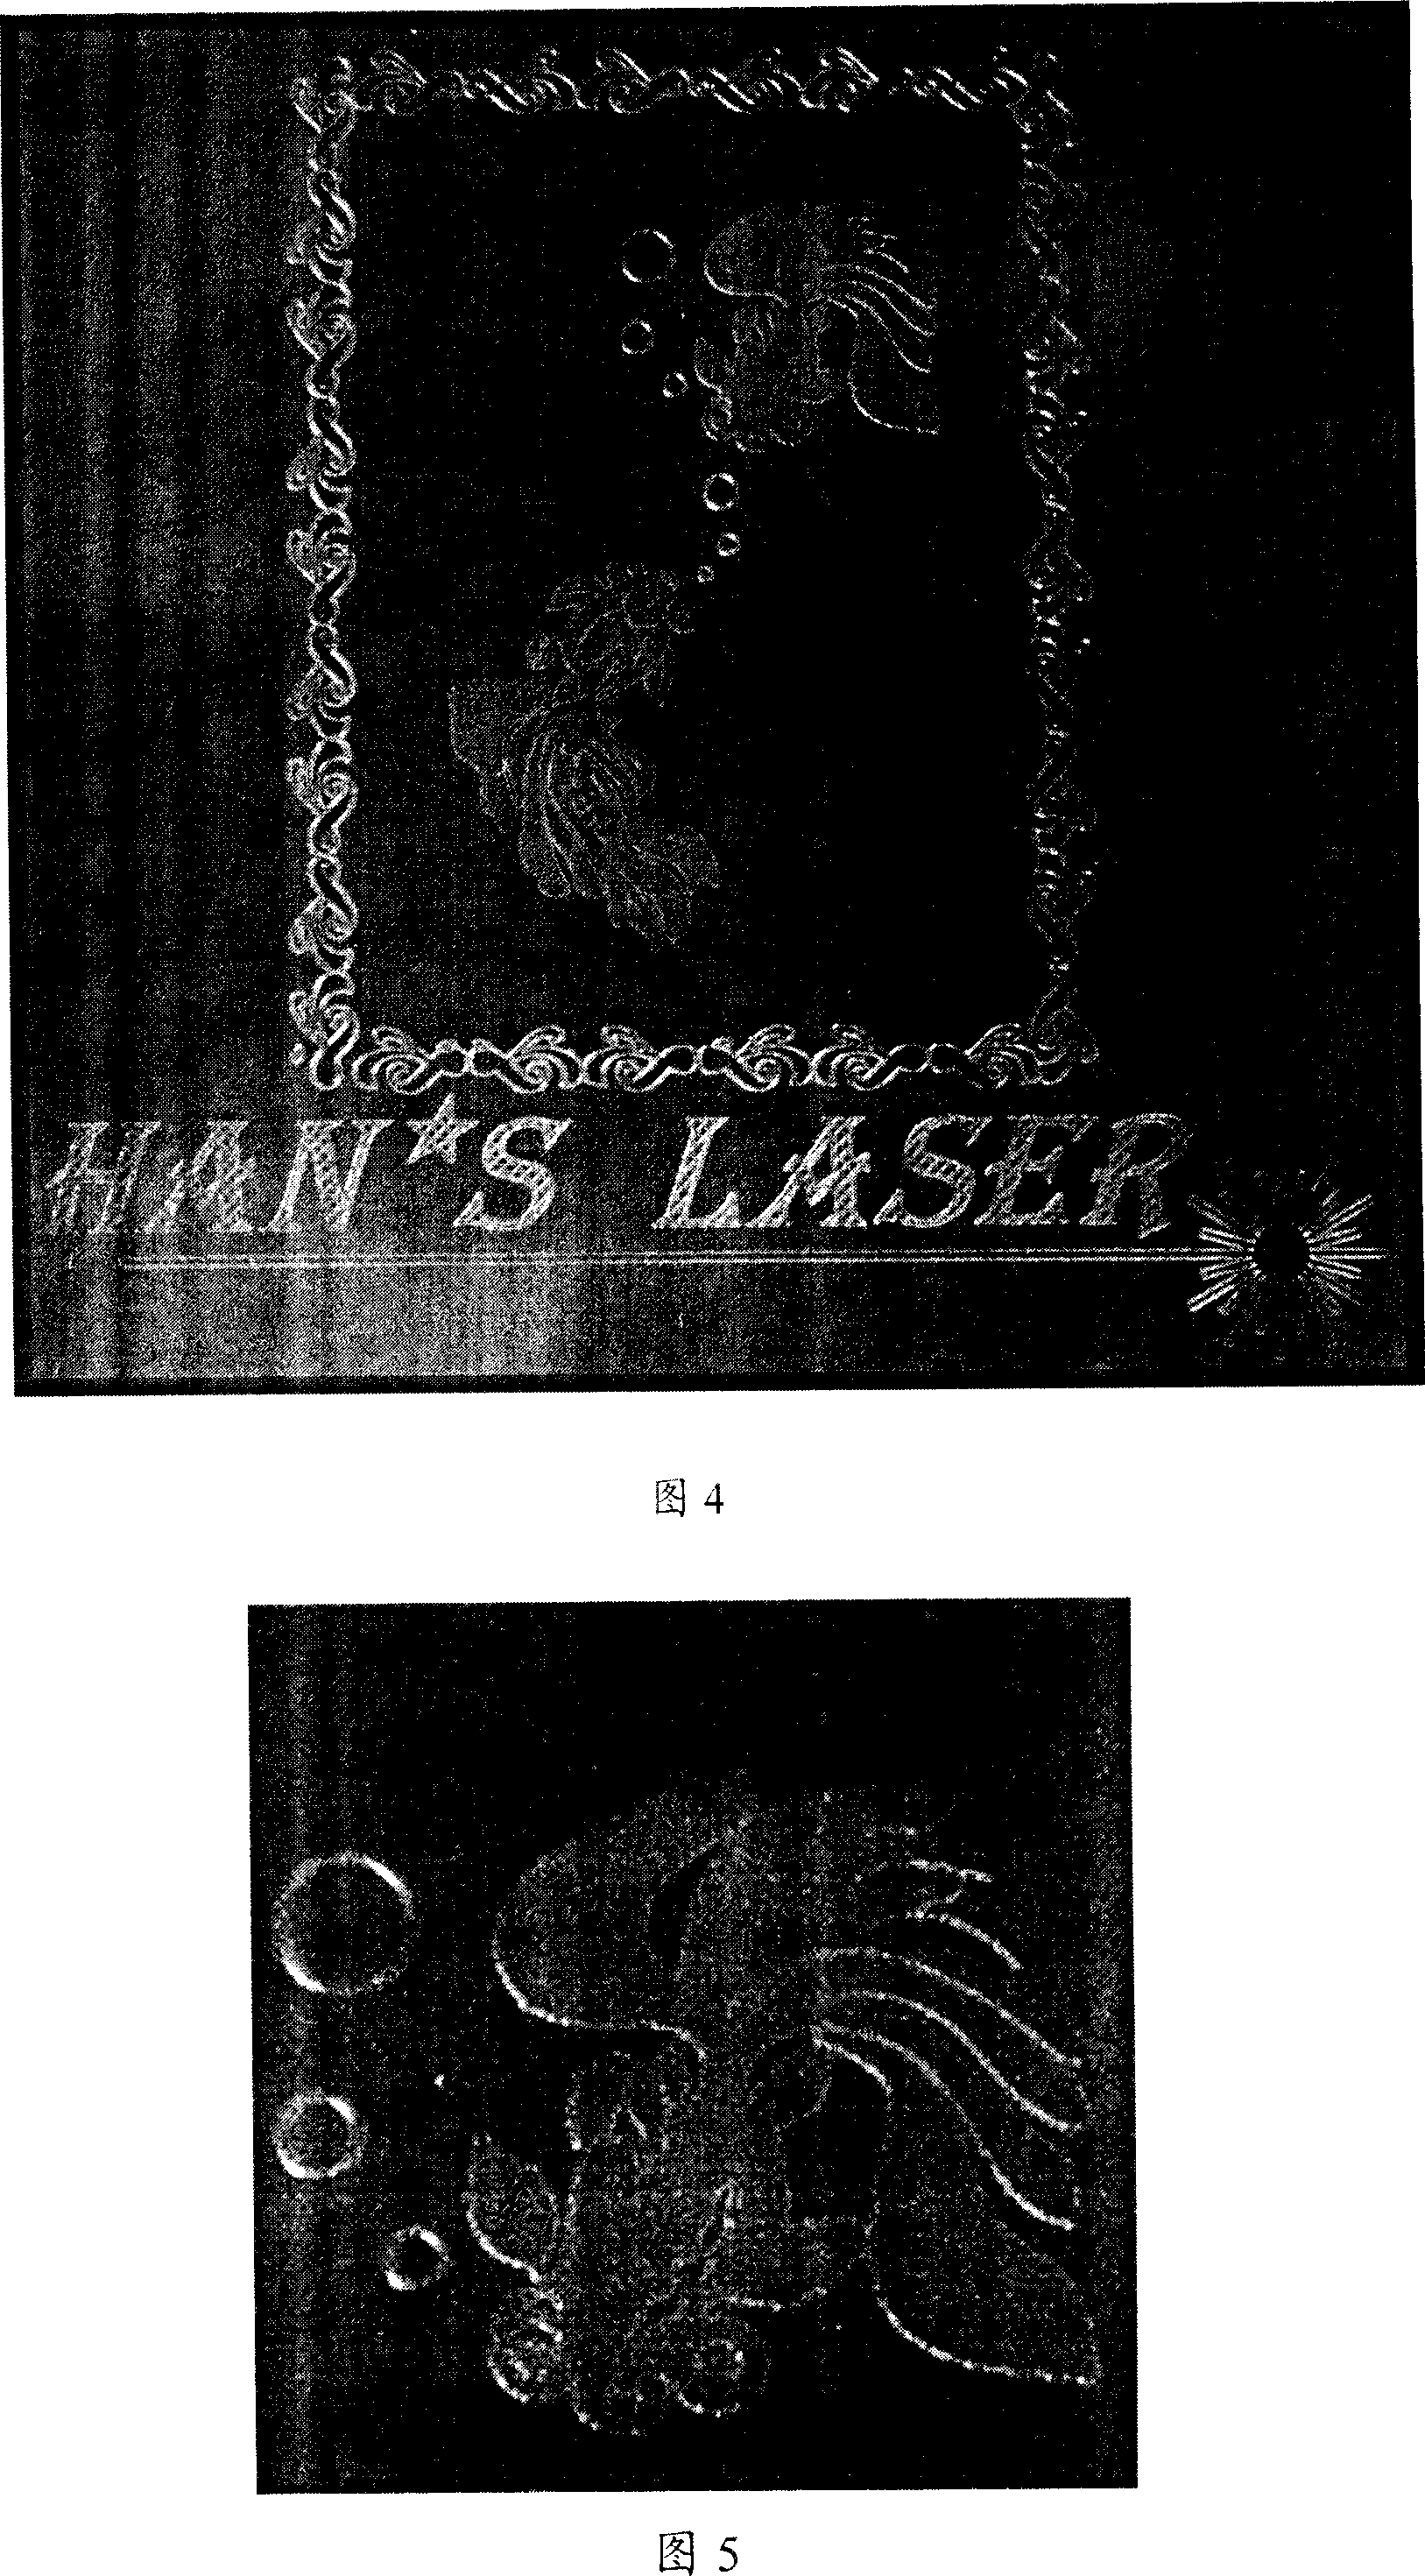 Method for marking on glass by YAG laser